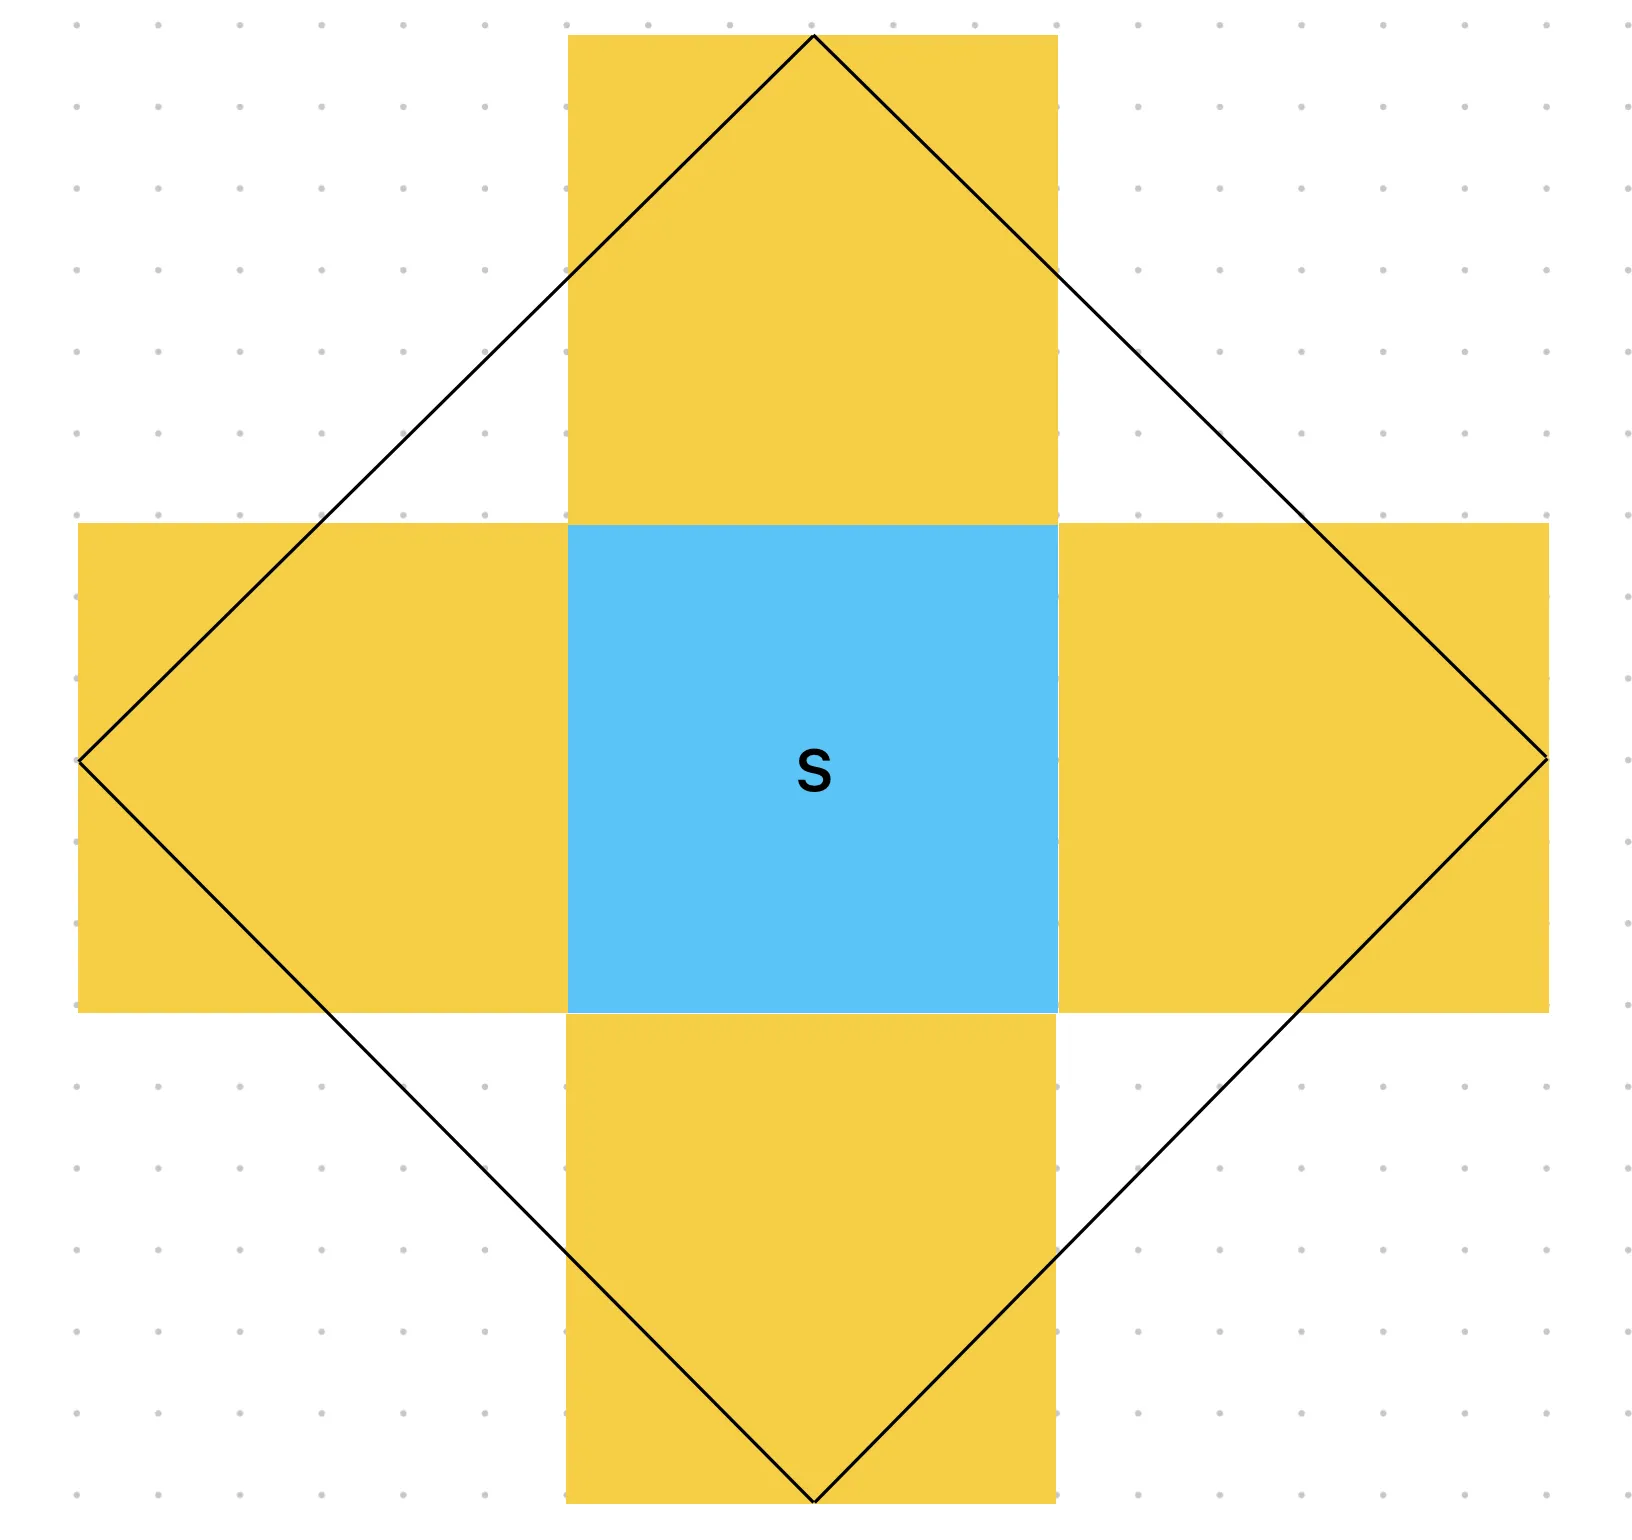 a grid showing 5 squares and a diamond